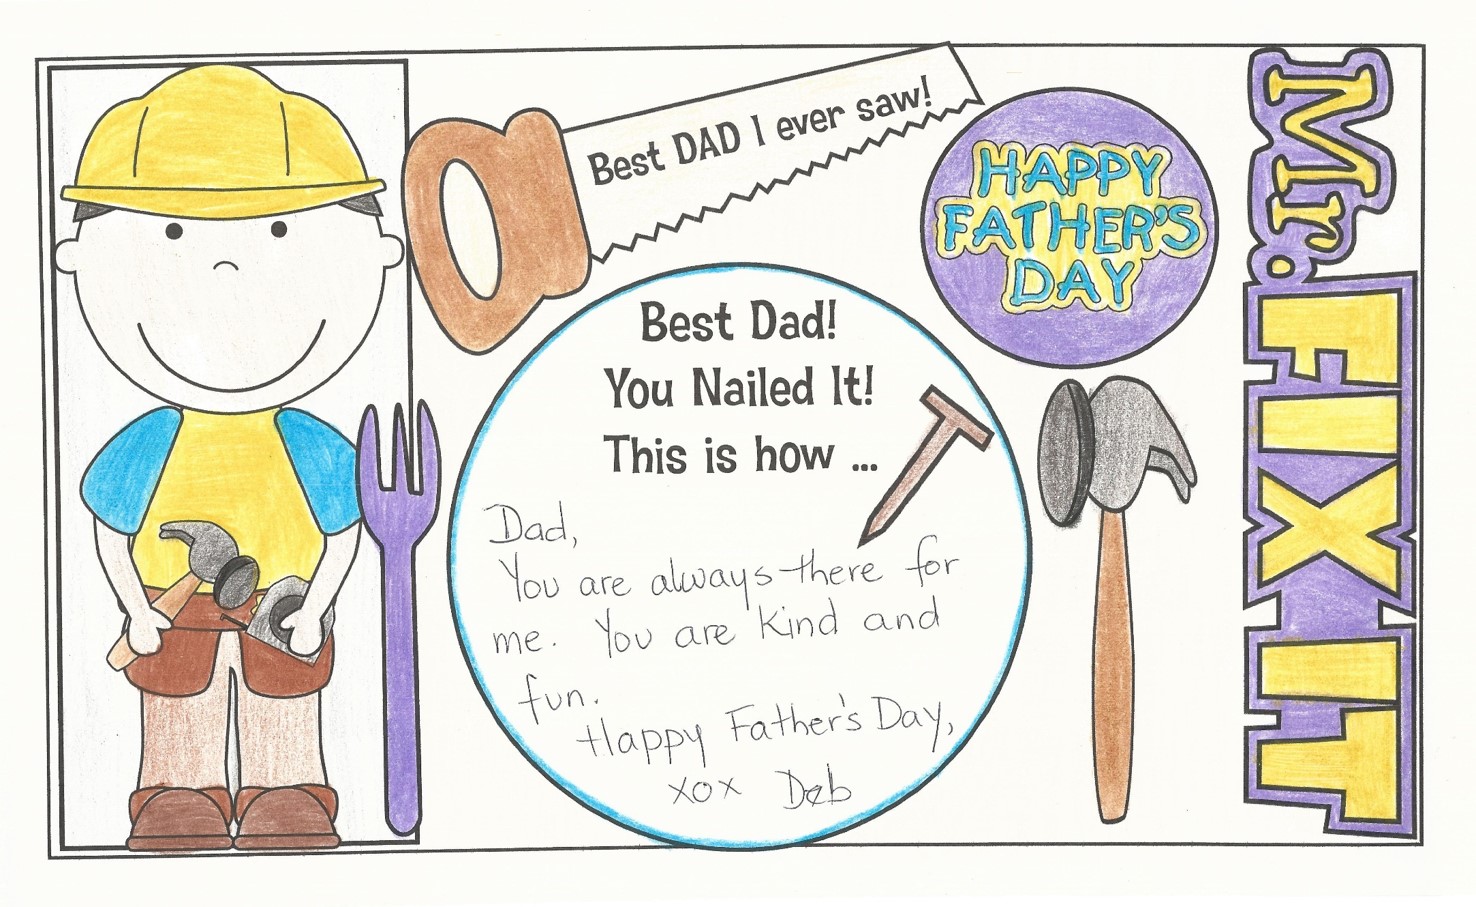 Father's Day Craft - Make DAD a Placemat